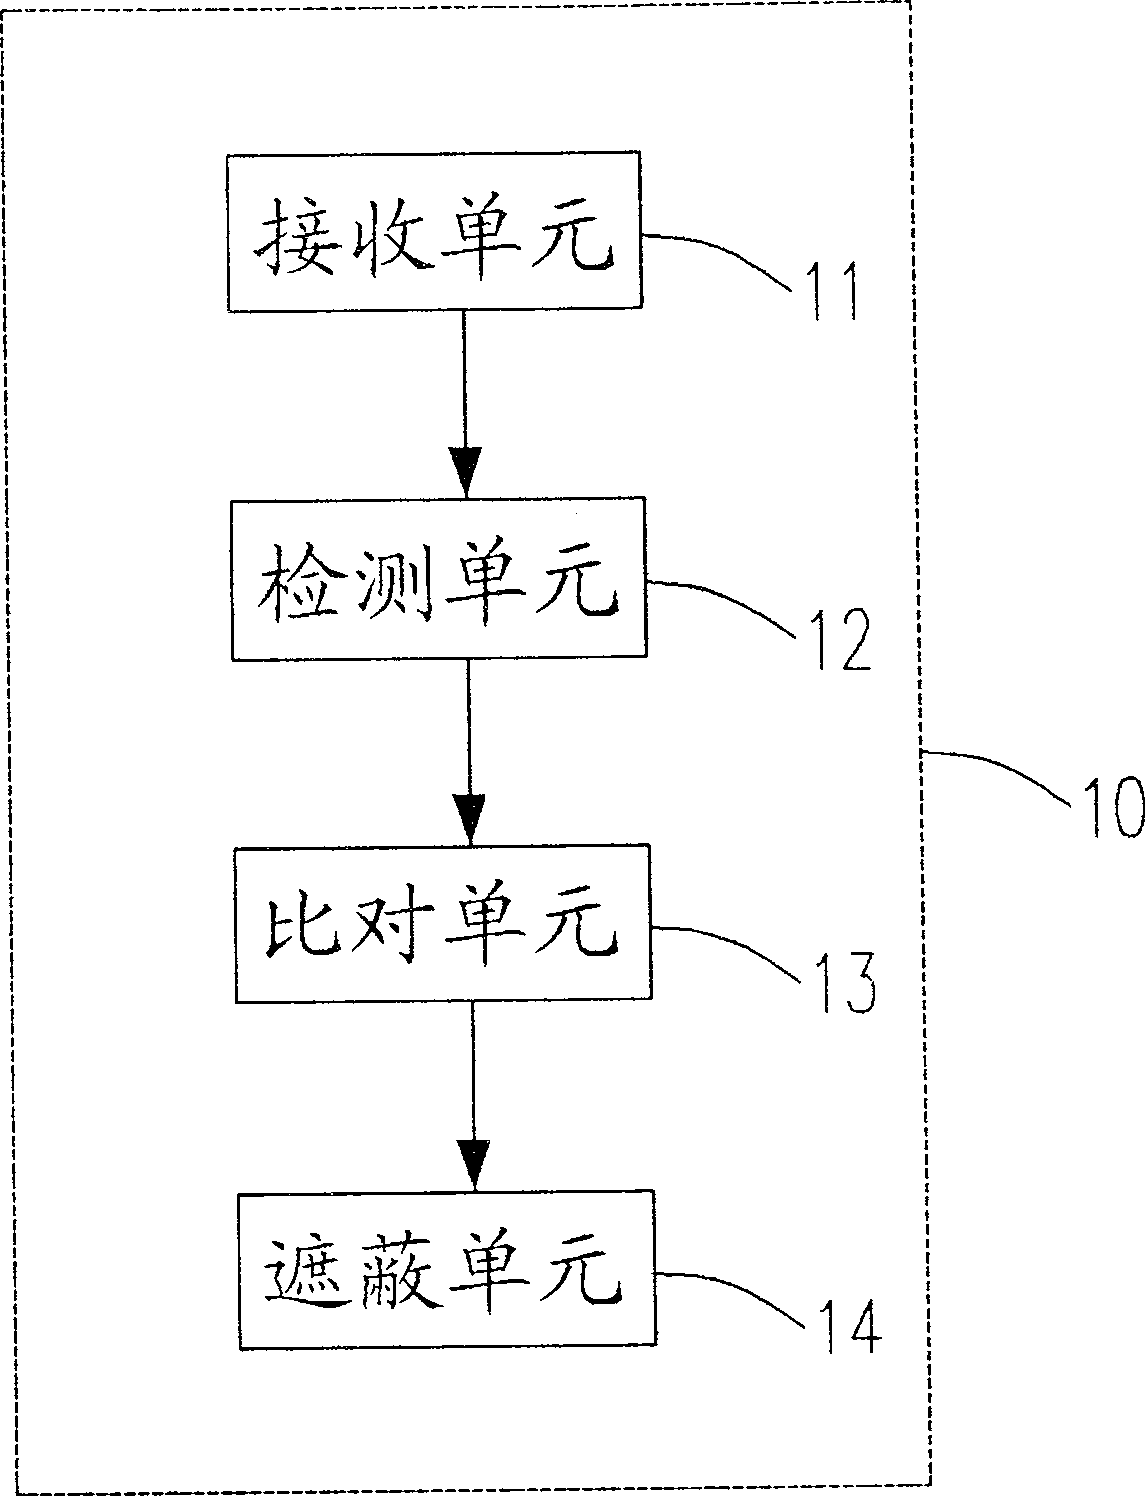 Display system and method thereof